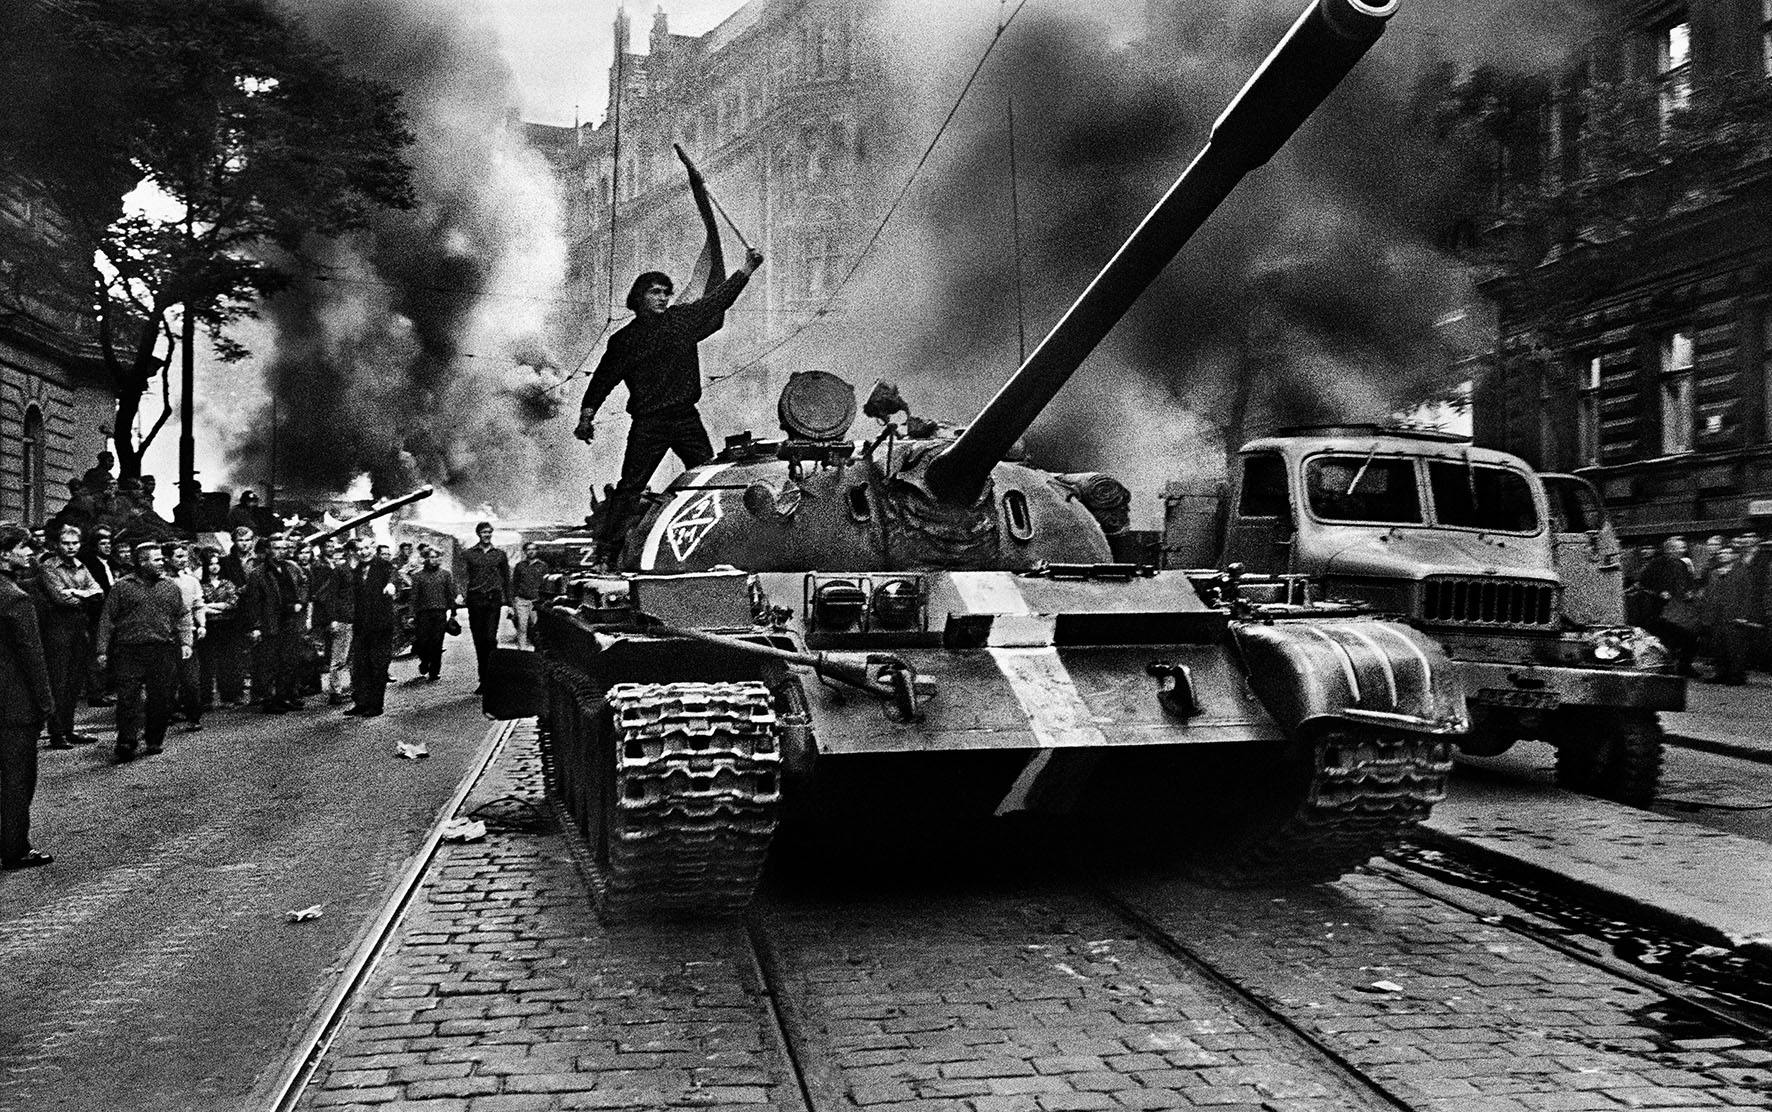 Democracy movement faces off against Russian invasion: the 1968 Prague Spring